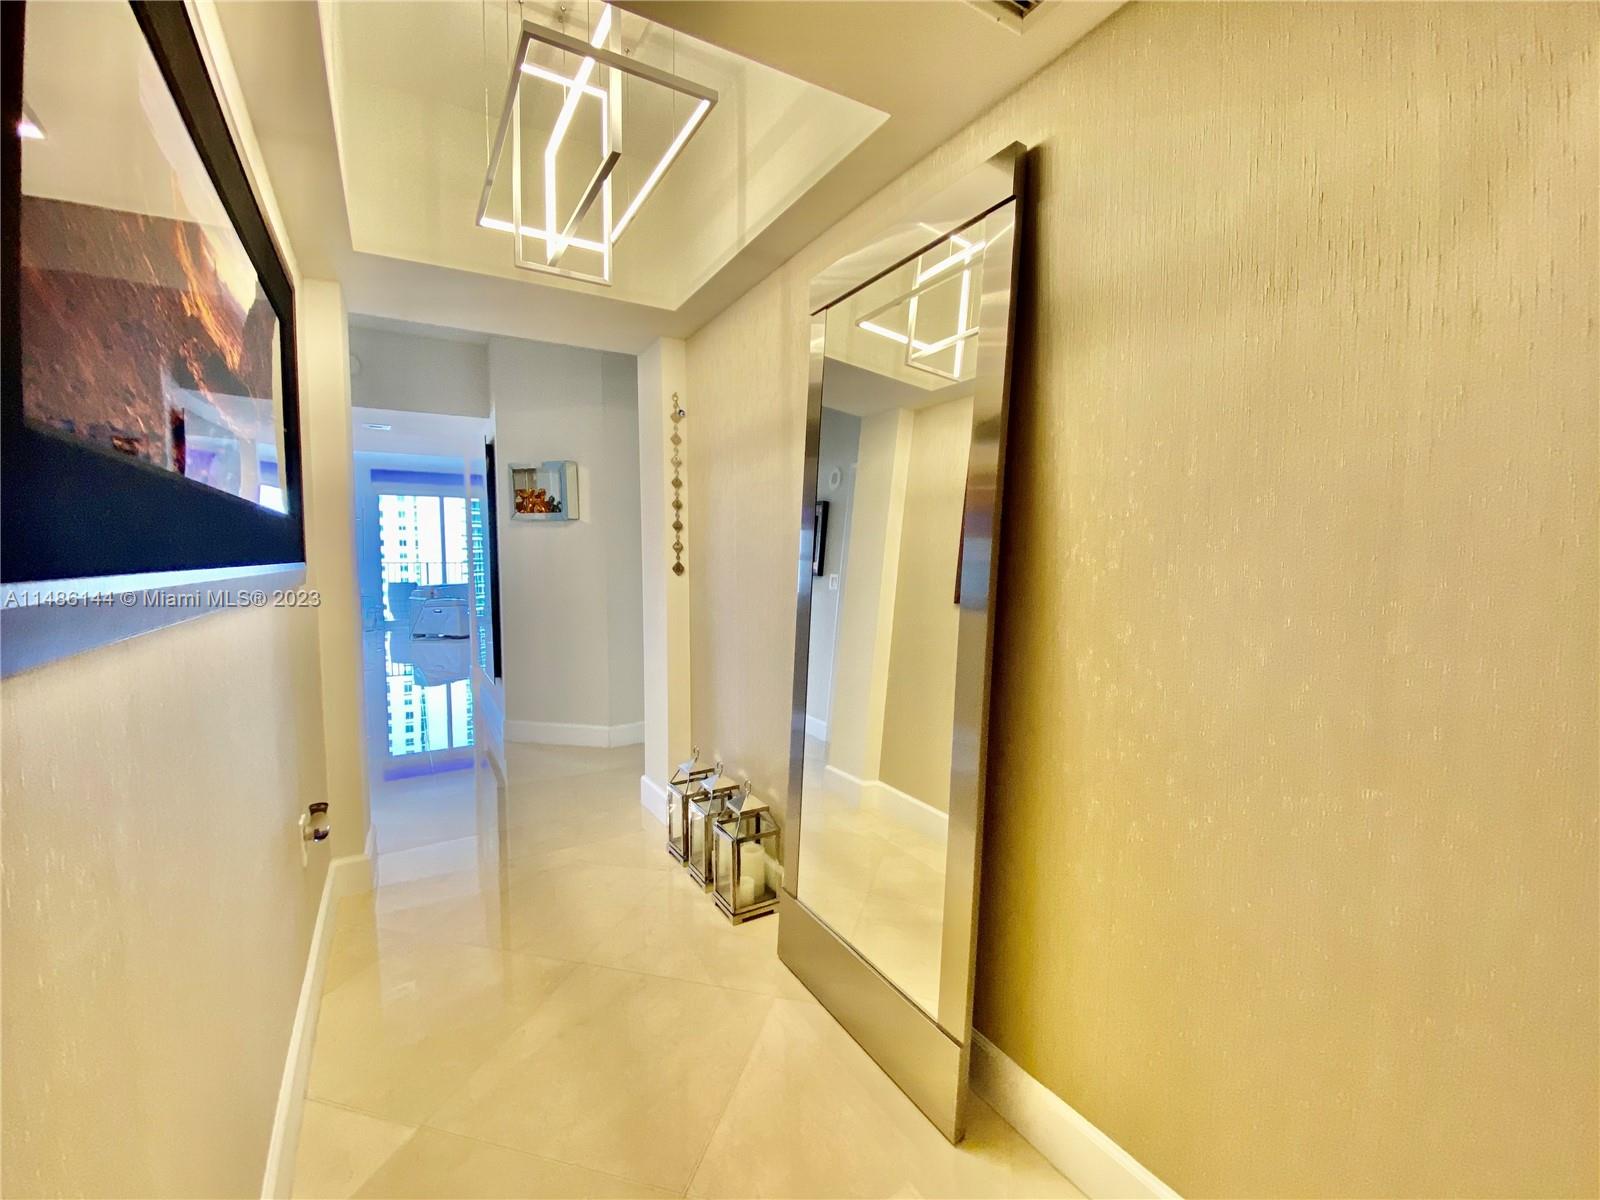 Photo 2 of Turnberry Village So Towe Apt 1220 in Aventura - MLS A11486144